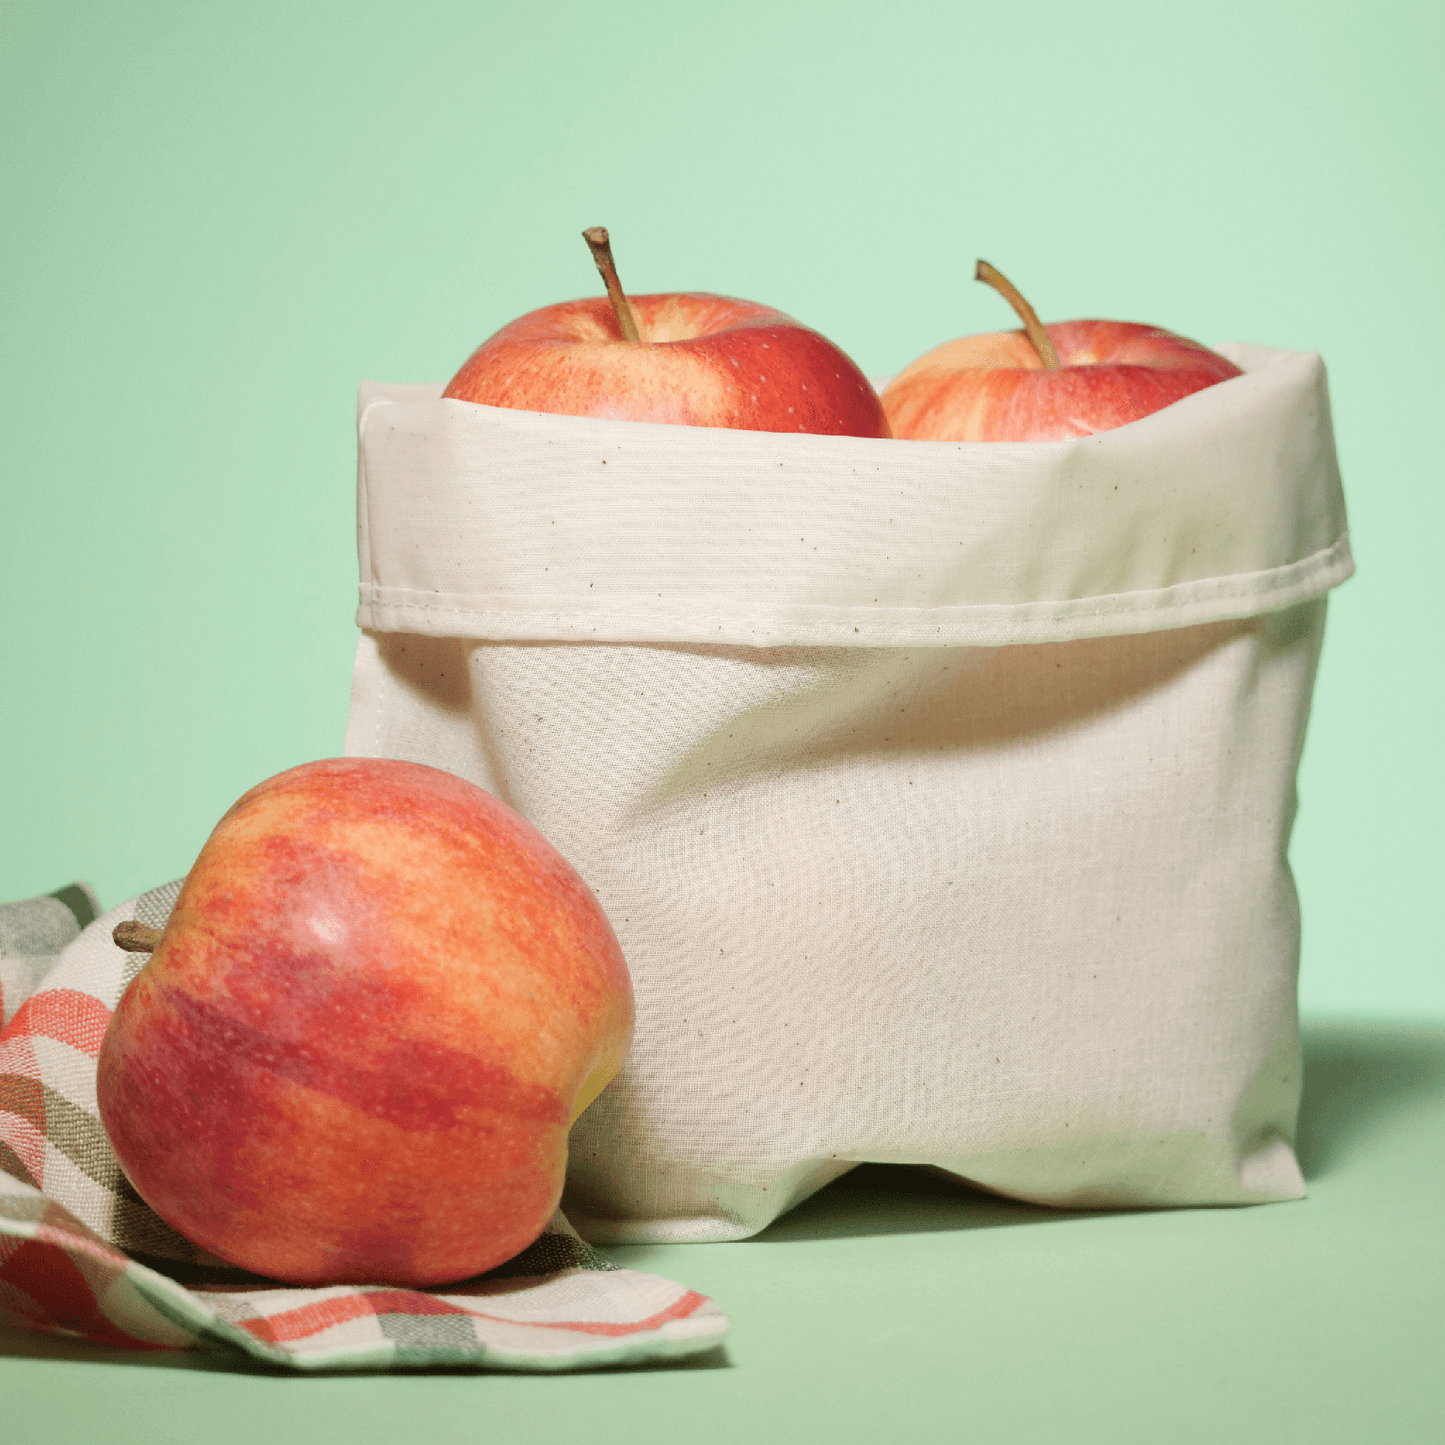 Food Huggers fabric cuff bag reusable alternative to plastic wrap preserves apples and in front of this bag an apple